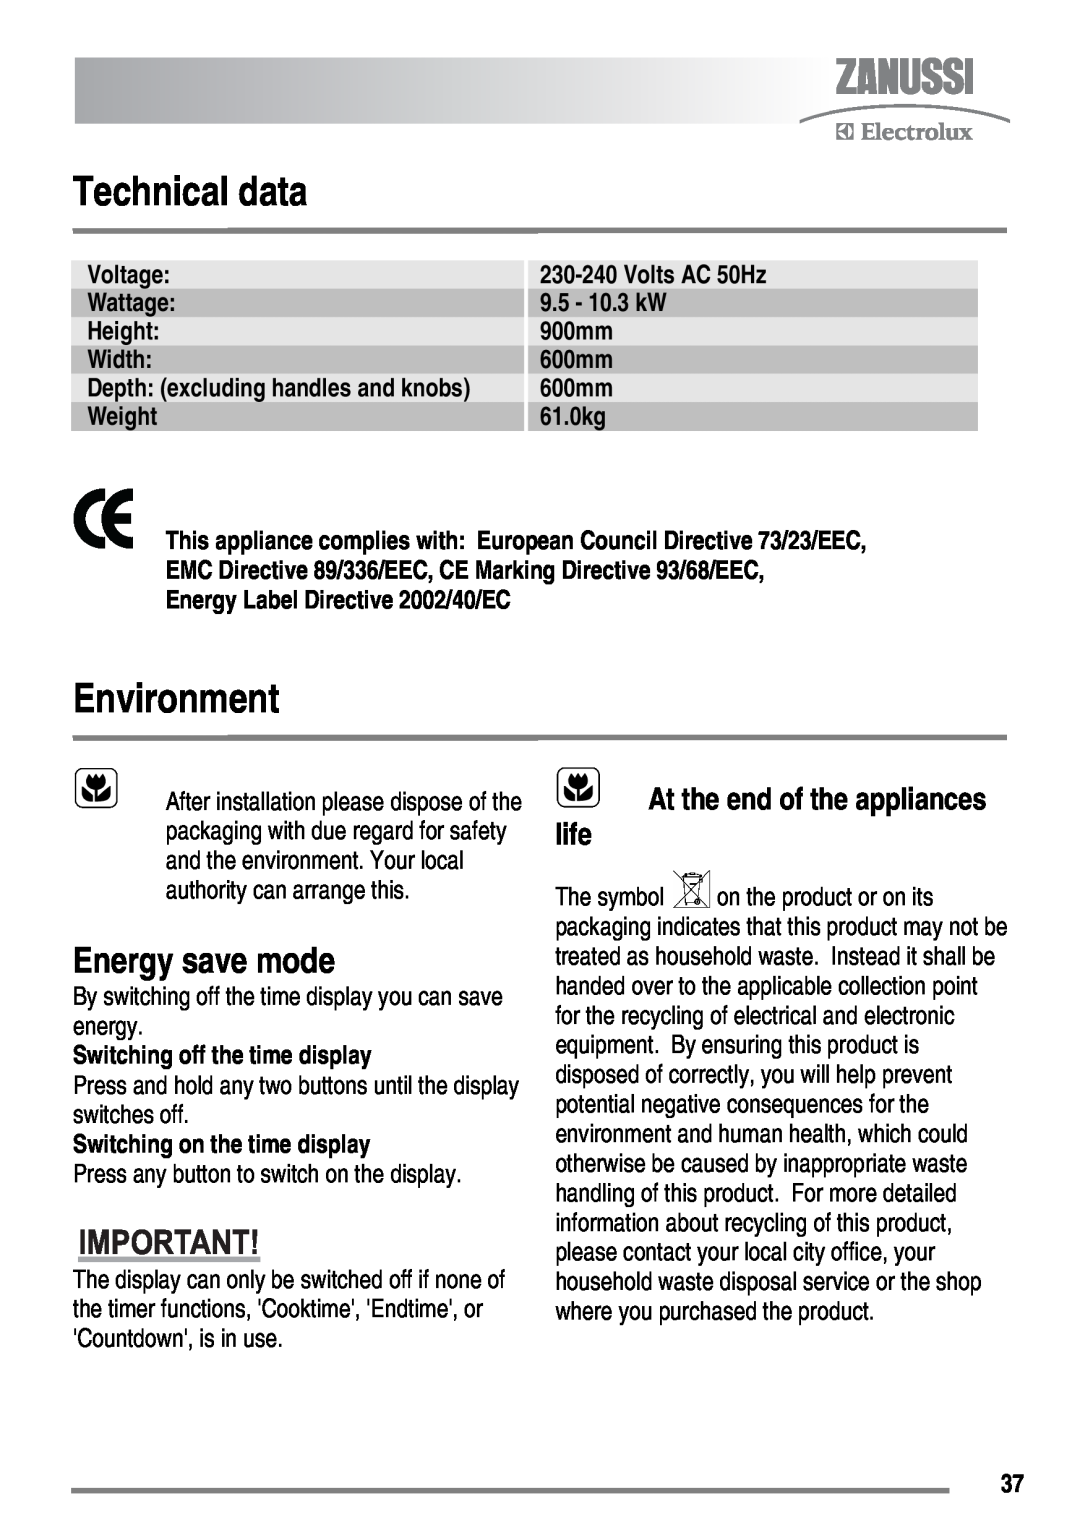 Zanussi ZKC6040 Technical data, Environment, Energy save mode, At the end of the appliances life, Voltage, Volts AC 50Hz 